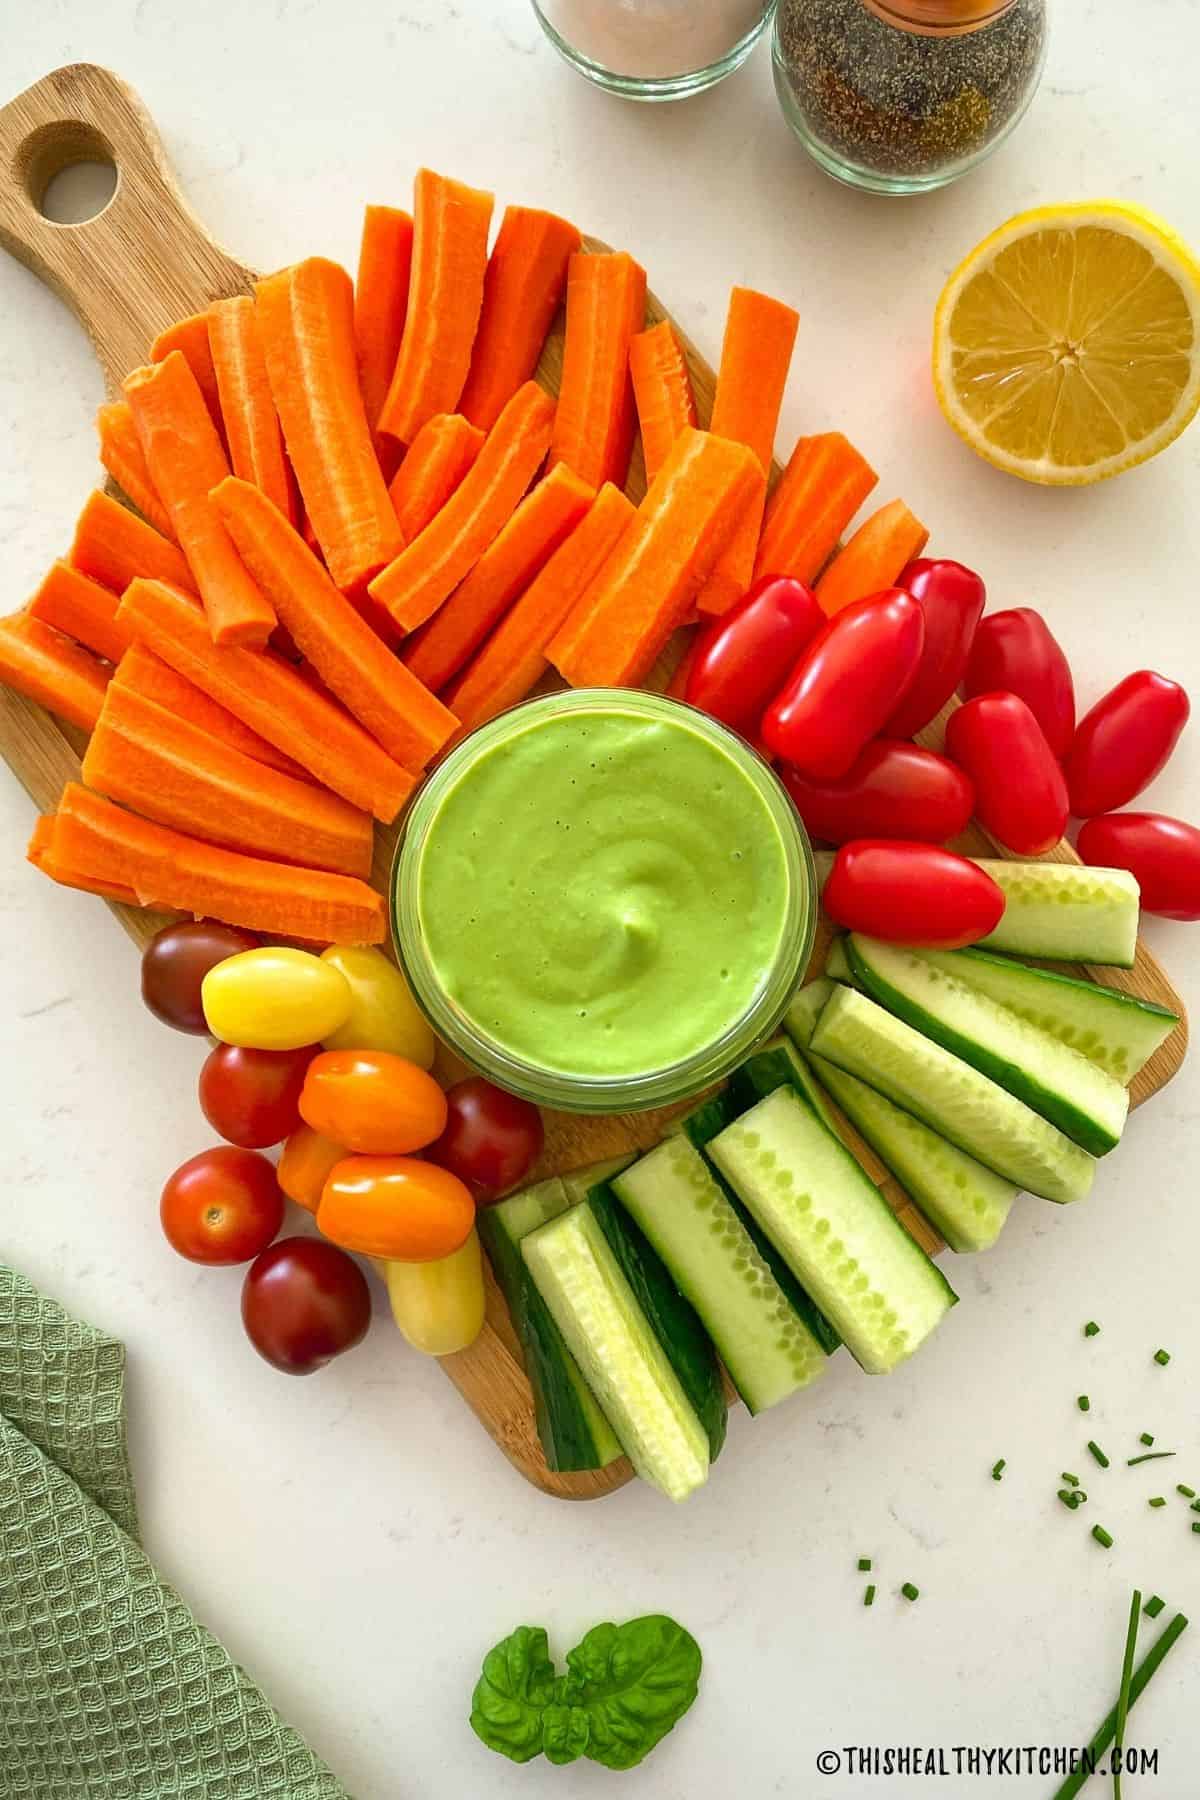 Cutting board with cucumber sticks, carrot sticks and cherry tomatoes around jar of green dip.